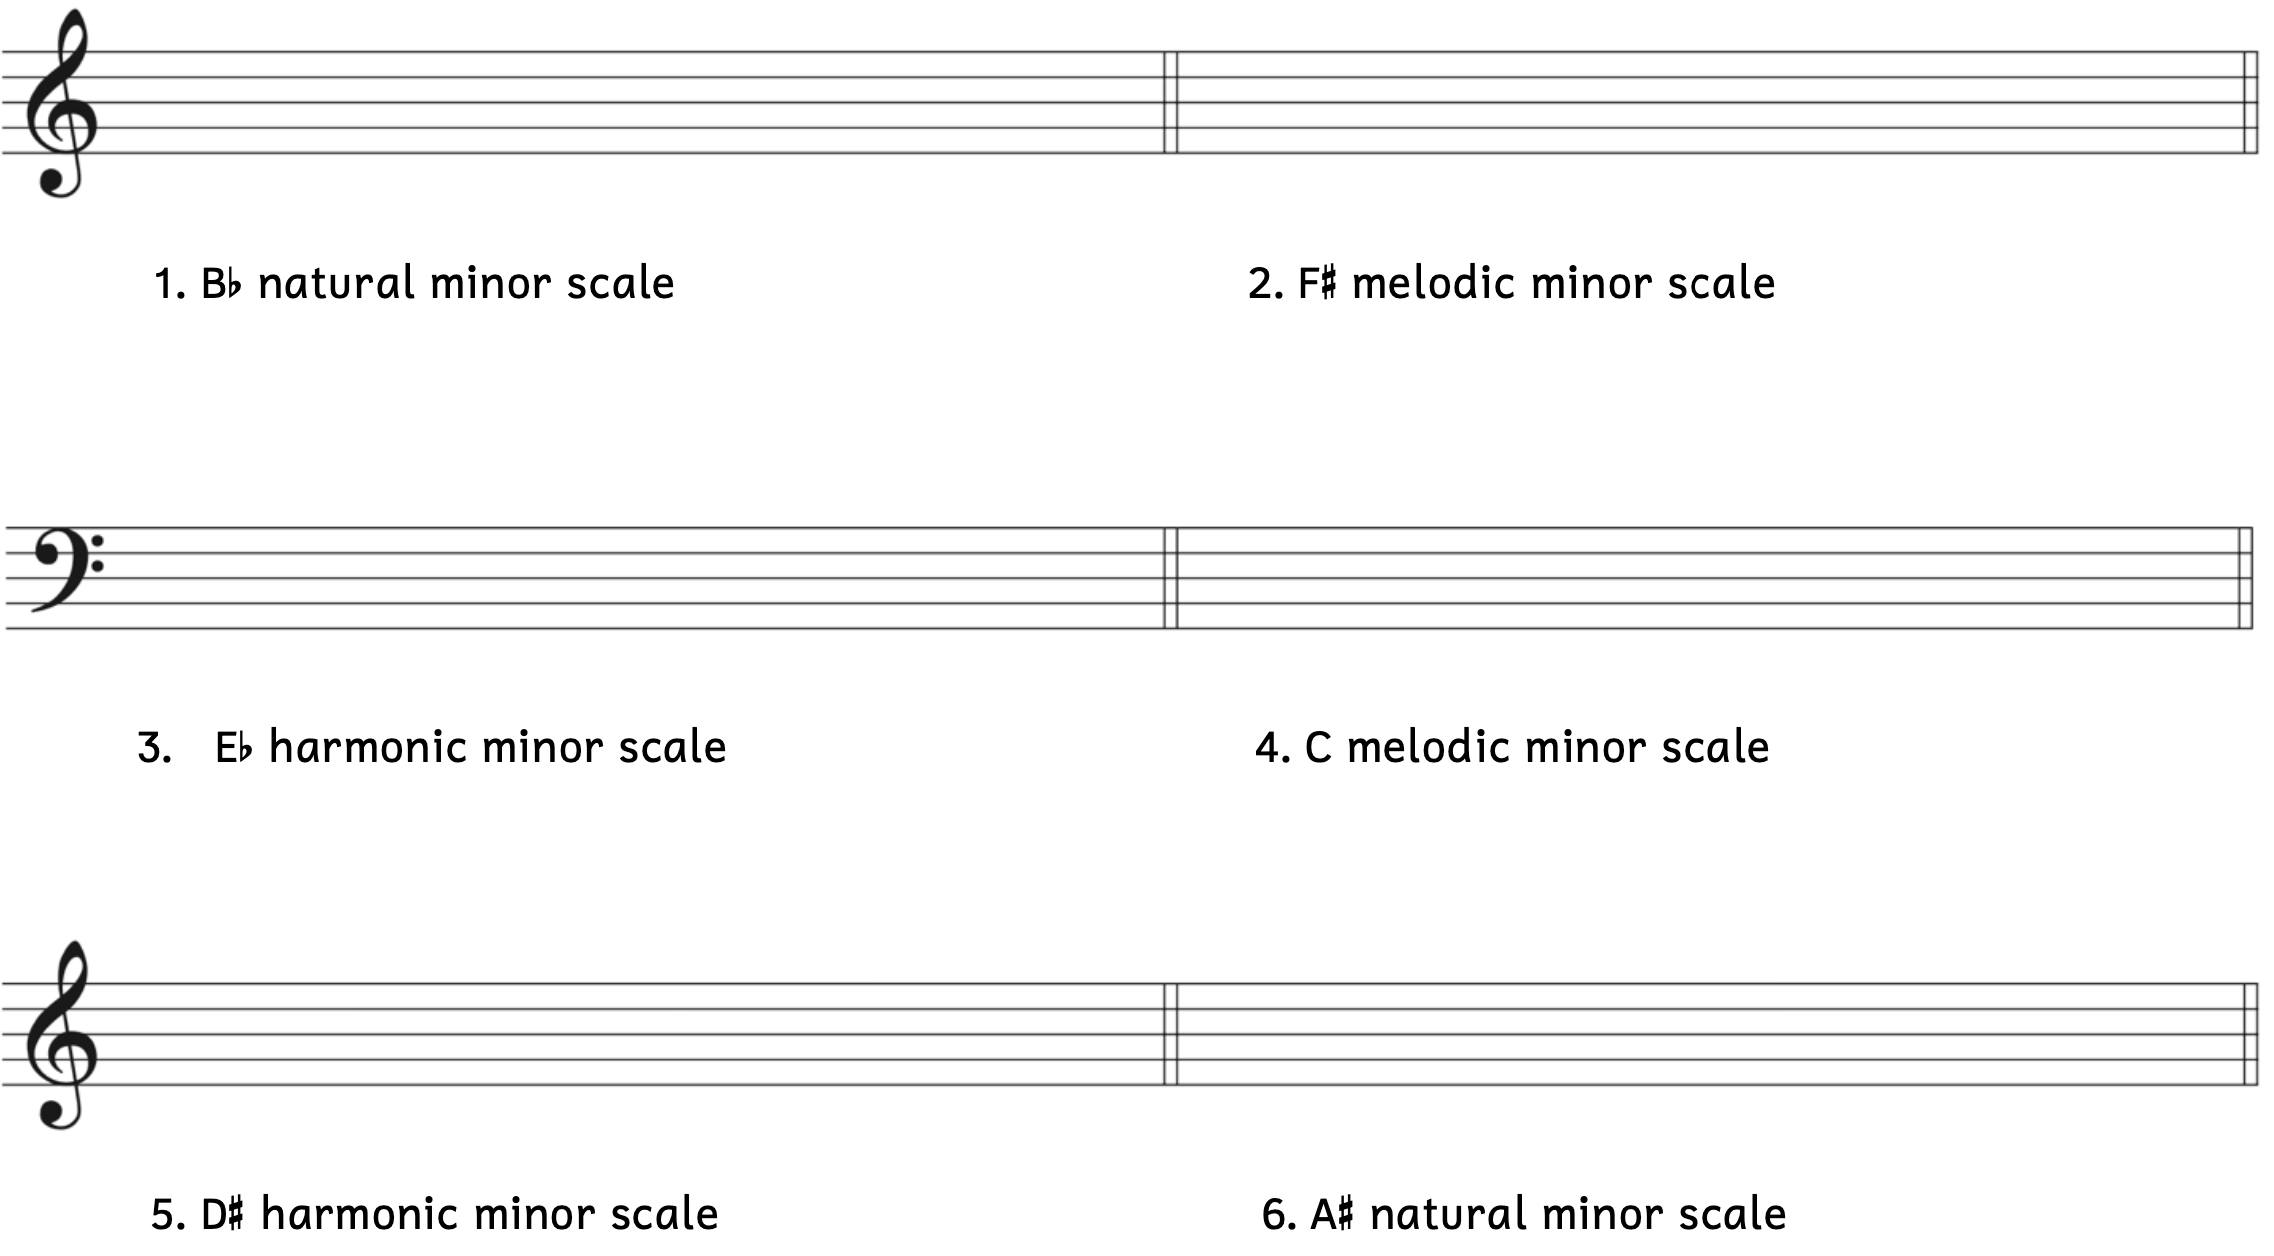 Number 1, B-flat natural minor scale in treble clef. Number 2, F-sharp melodic minor scale in treble clef. Number 3, E-flat harmonic minor scale in bass clef. Number 4, C melodic minor scale in bass clef. Number 5, D-sharp harmonic minor scale in treble clef. Number 6, A-sharp natural minor scale in treble clef.